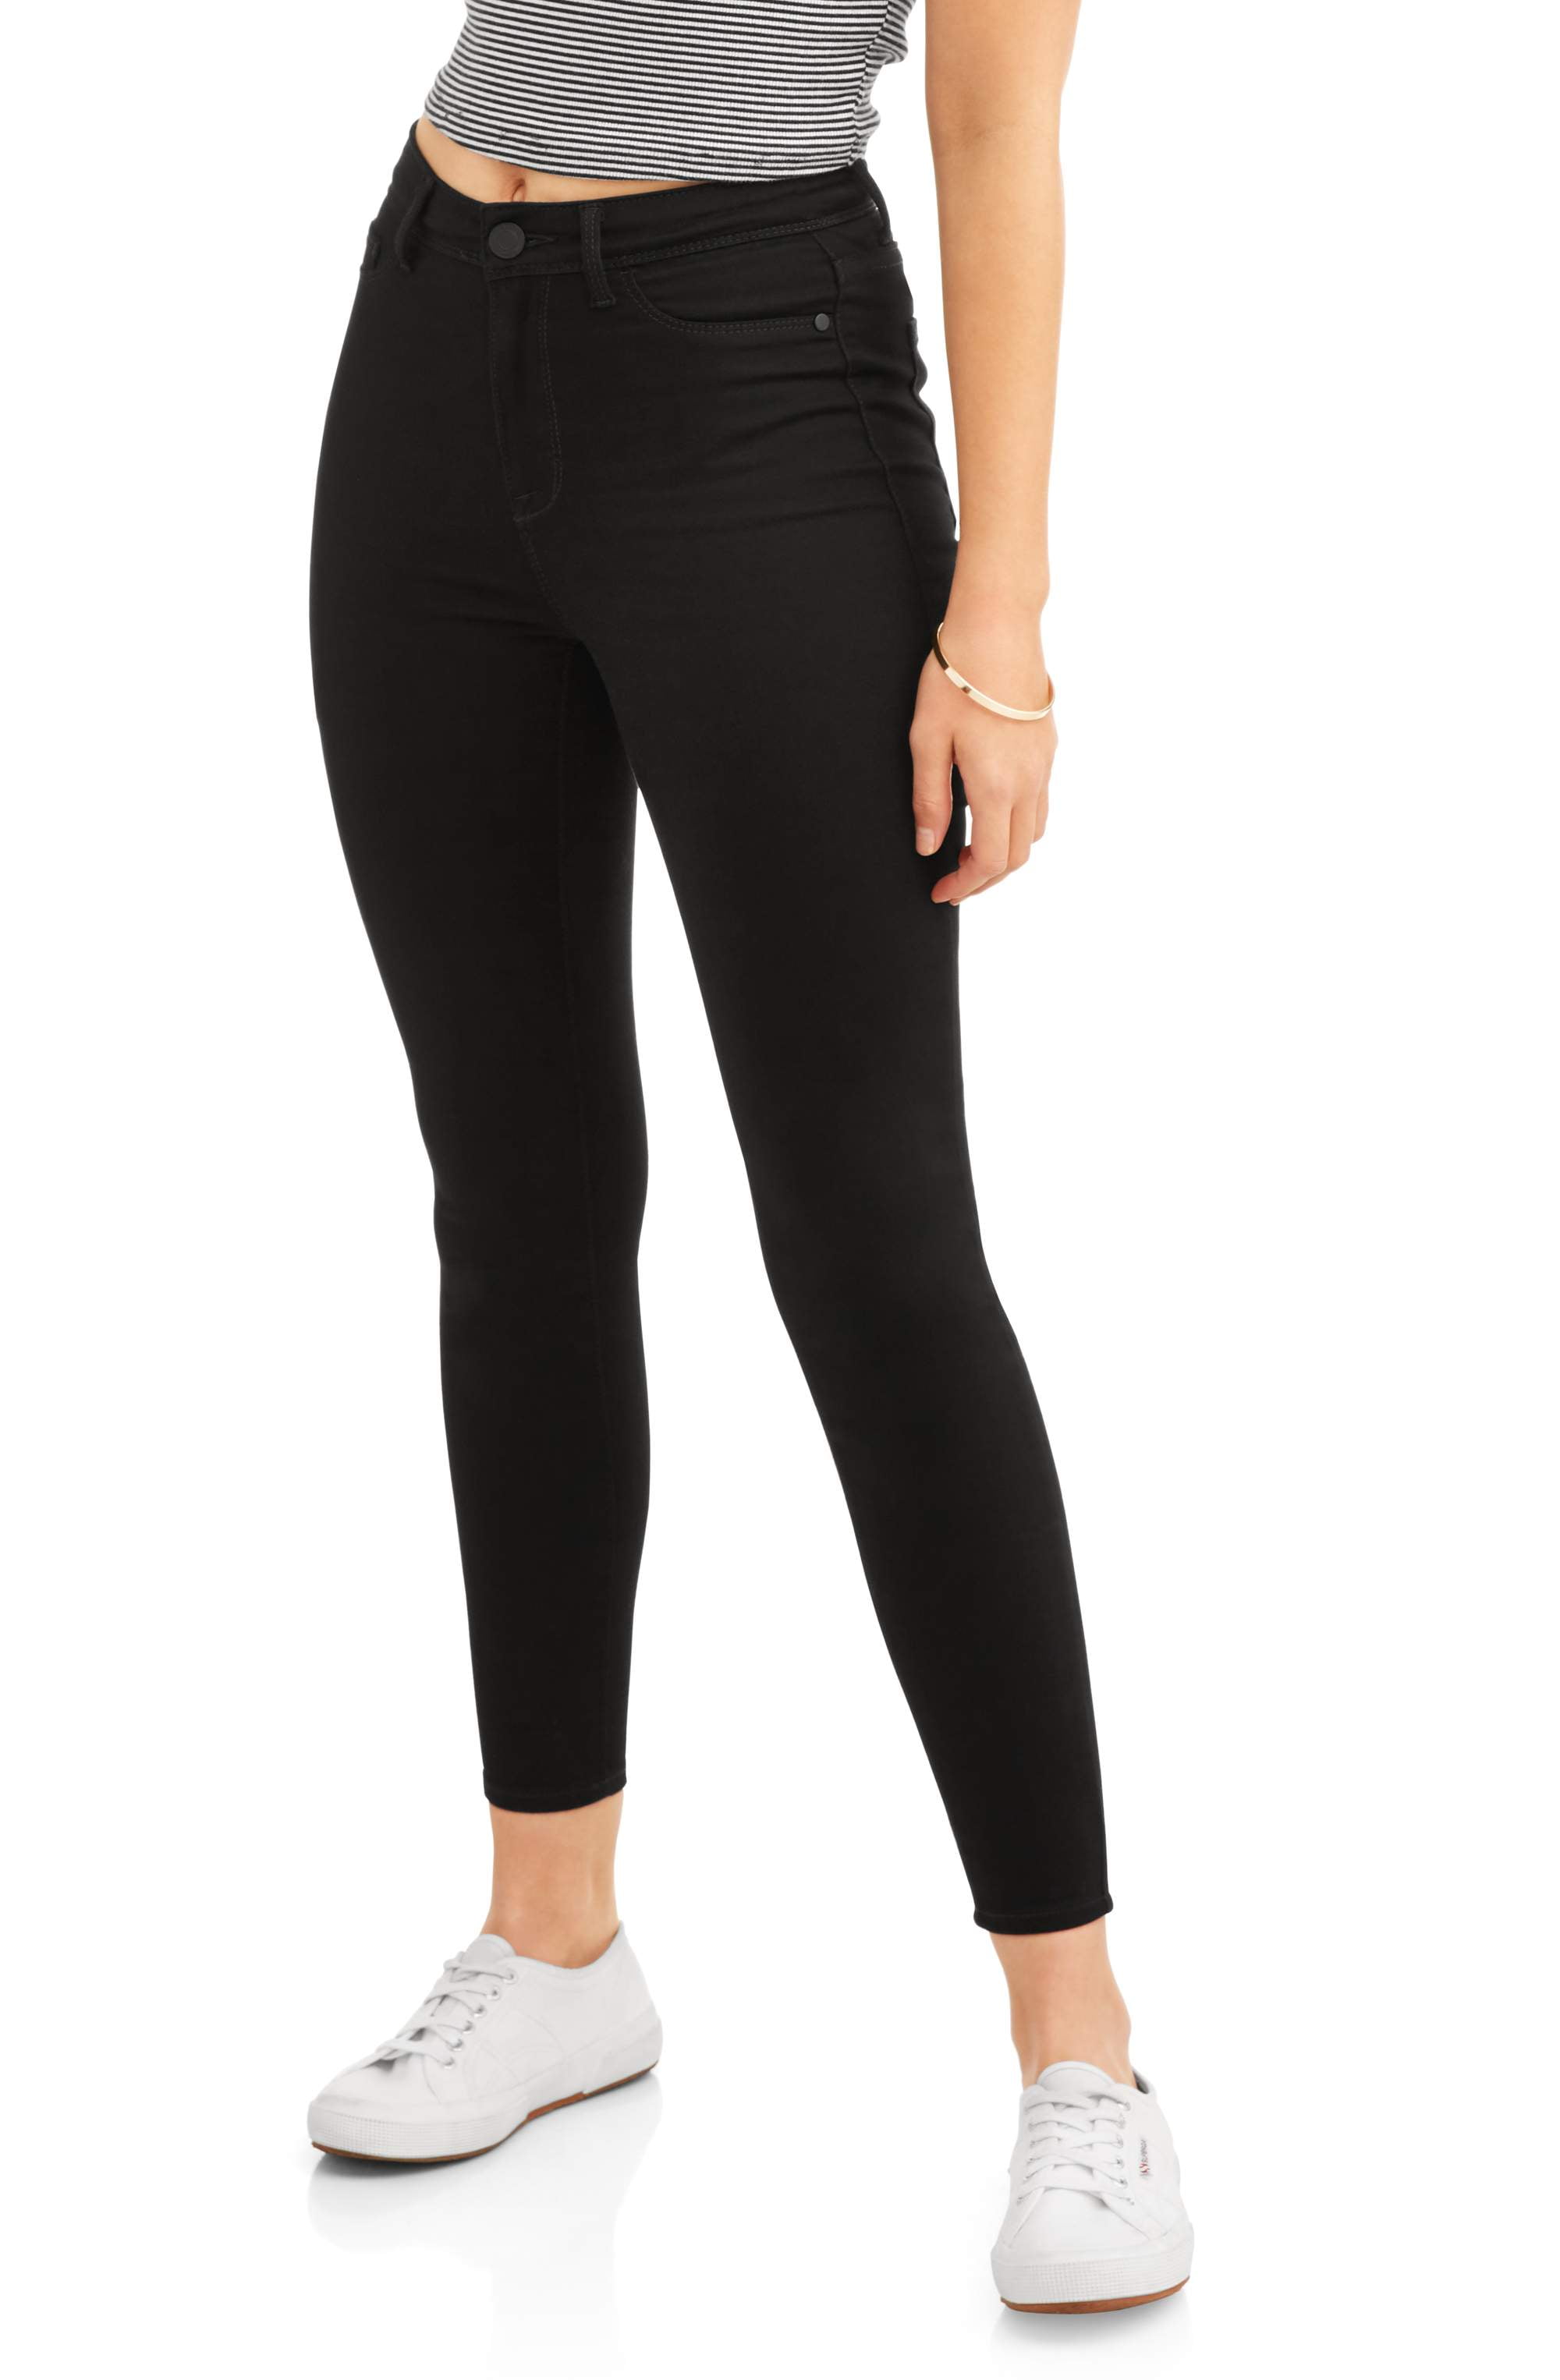 Women's Sculpted Ankle Jegging 